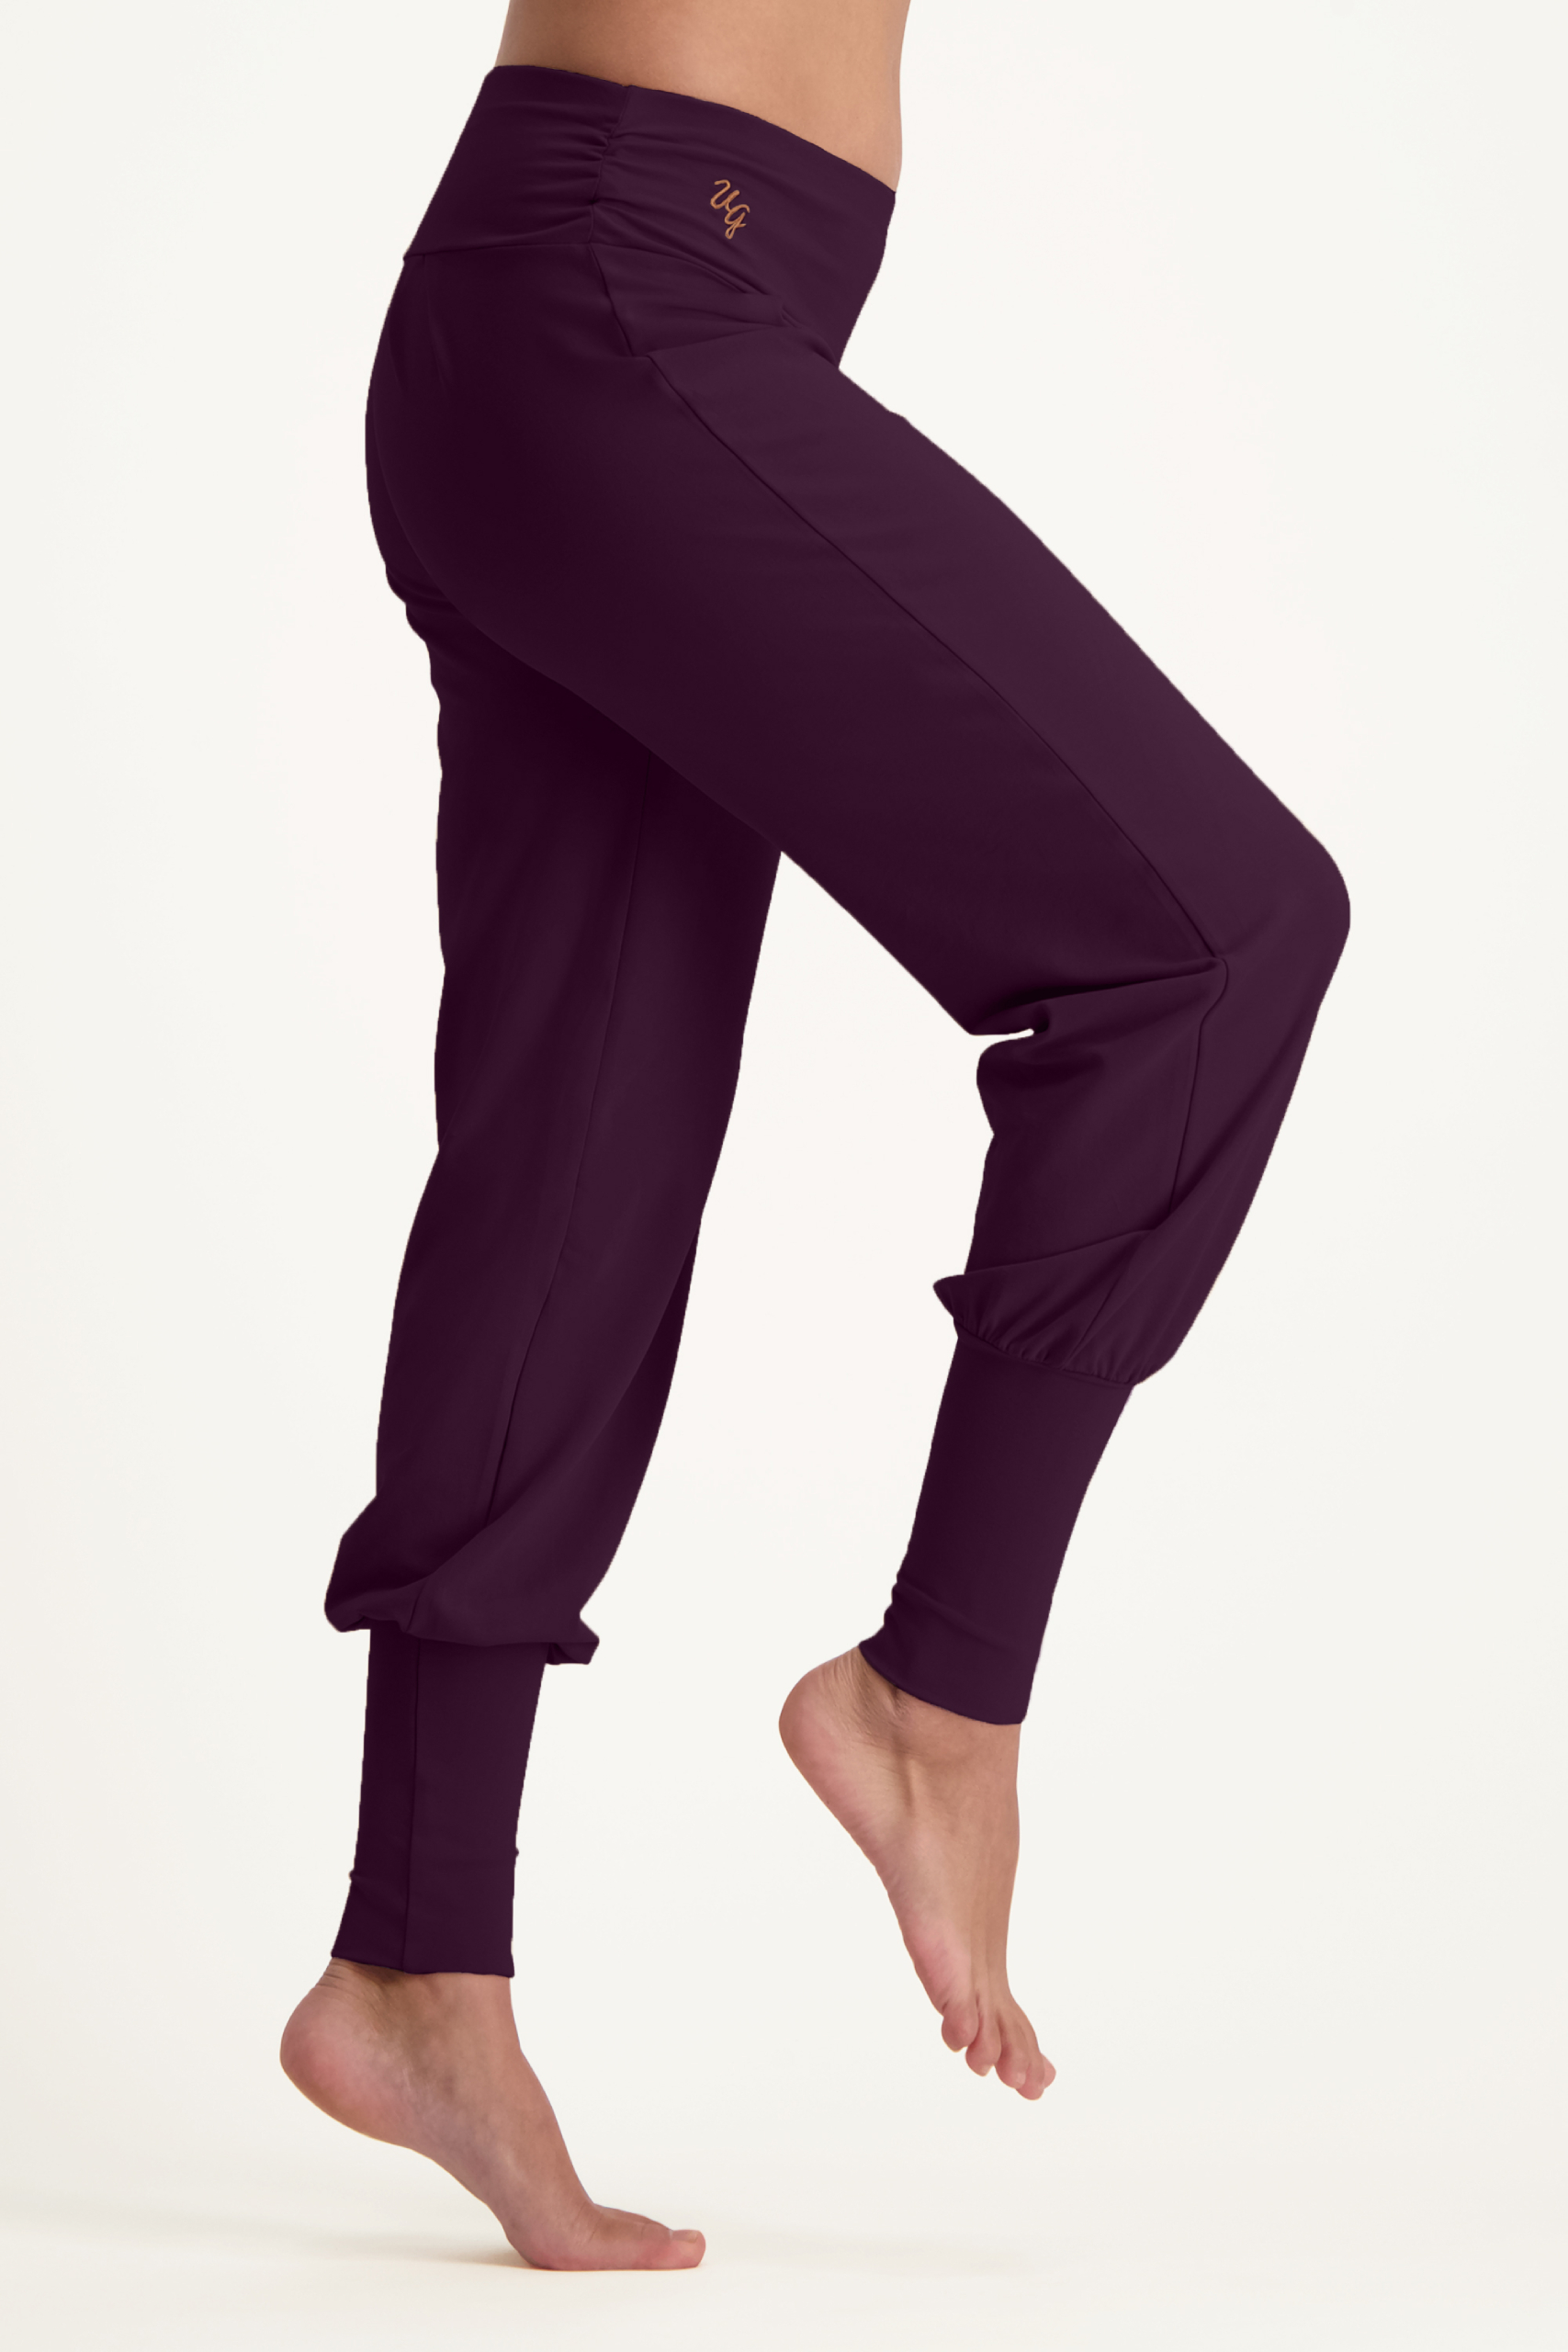 Amazon.com: Women's Handmade Wide Leg Yoga Harem Pants From Viscose &  Cotton Fabric With Plus Sizes Available : Handmade Products